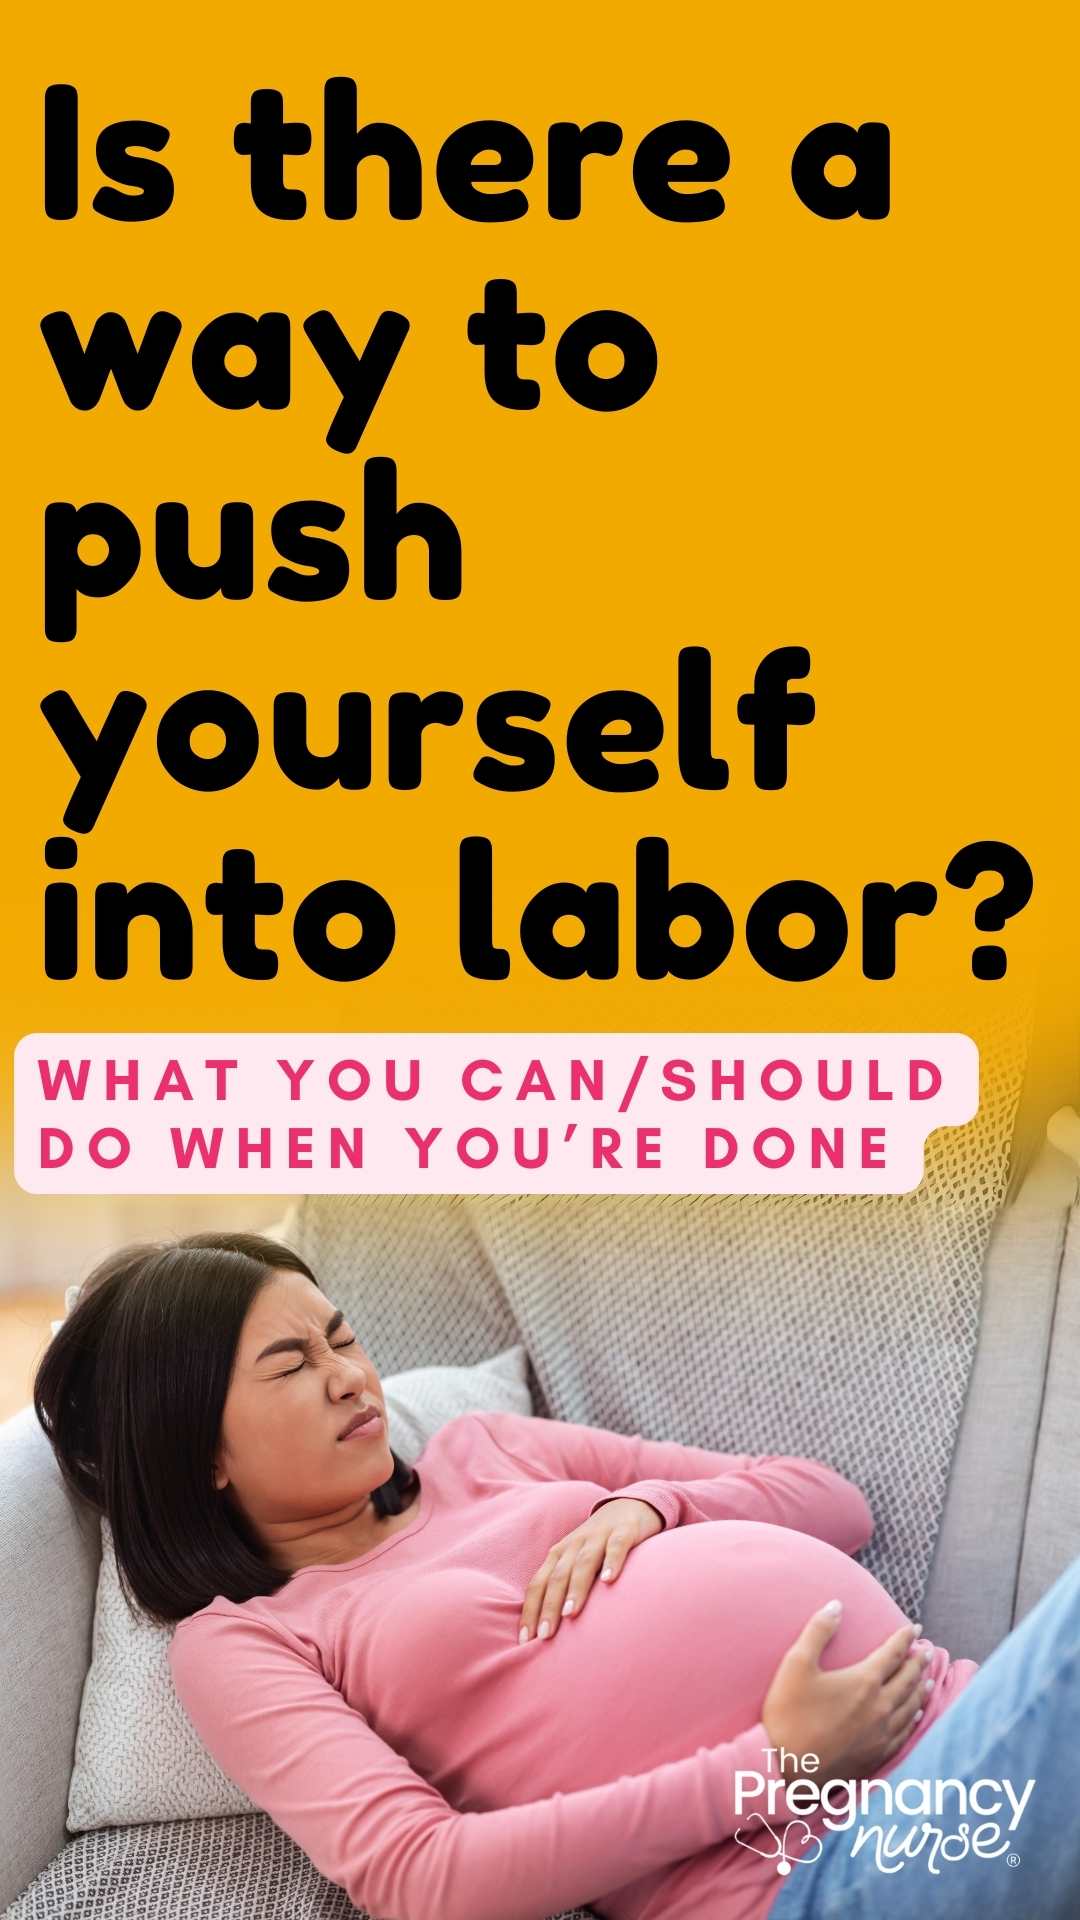 You're nearing the end of your pregnancy and eager for it to be over. Today we'll discuss 5 techniques that could help you prepare for labor! Remember, always consult your medical provider to make sure these measures are safe for you.